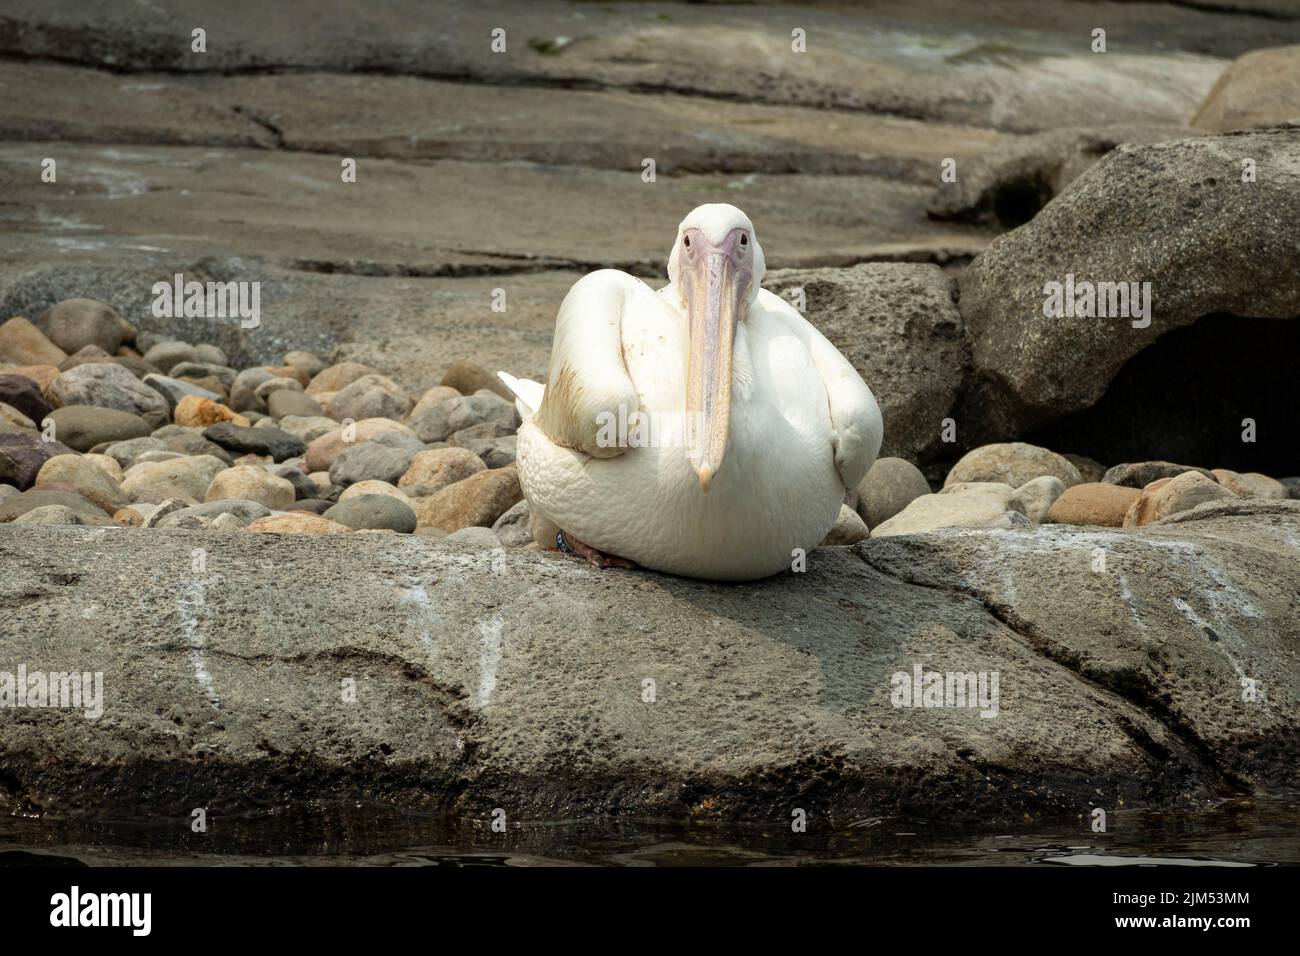 A closeup shot of a Great white pelican sitting on stone floor with rocks in Baltimore Zoo, Maryland Stock Photo